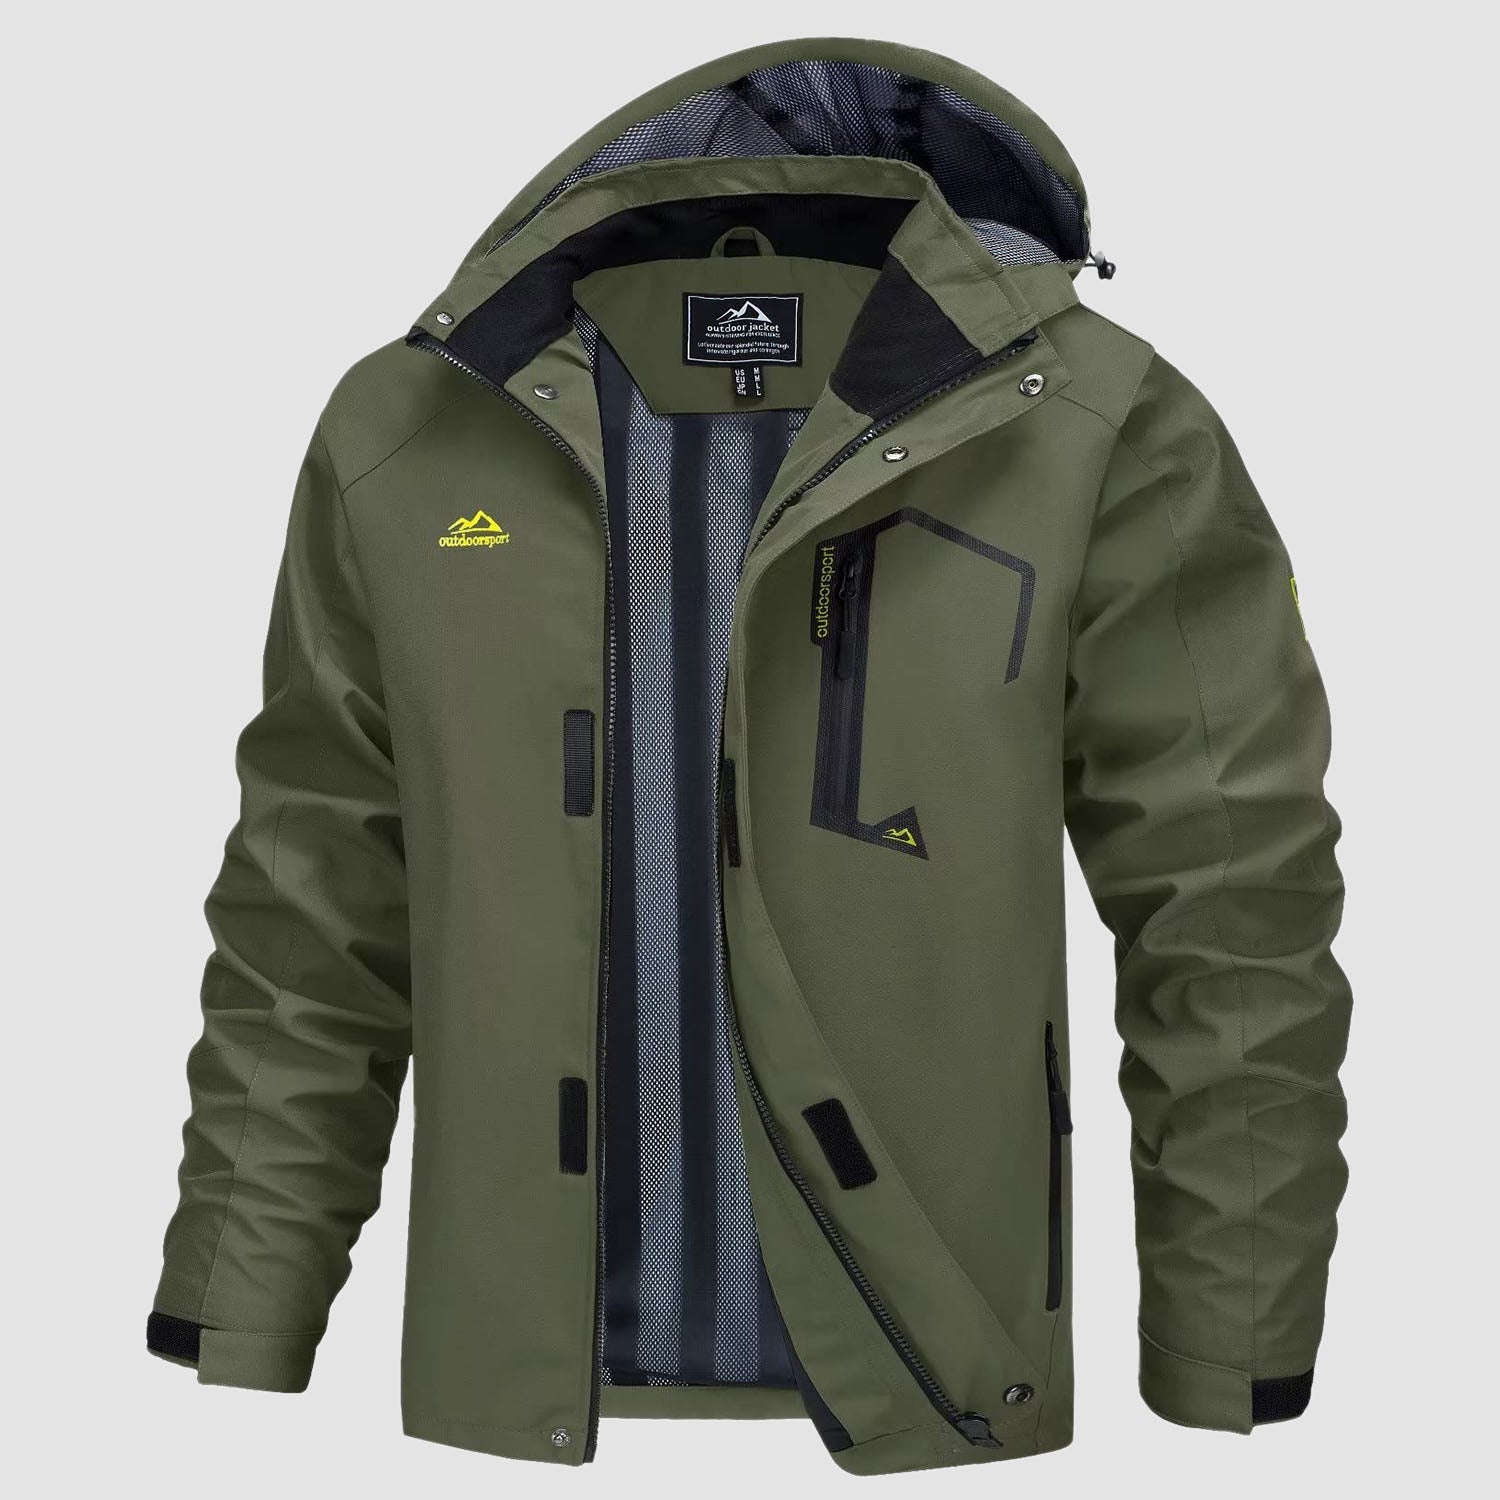 https://magcomsen.com/cdn/shop/products/Men_s-Hooded-Water-Resistant-Rain-Jacket-Windbreaker-with-Multi-Pockets-for-Hiking-Fishing-Runing_13_1.jpg?v=1669280046&width=1500